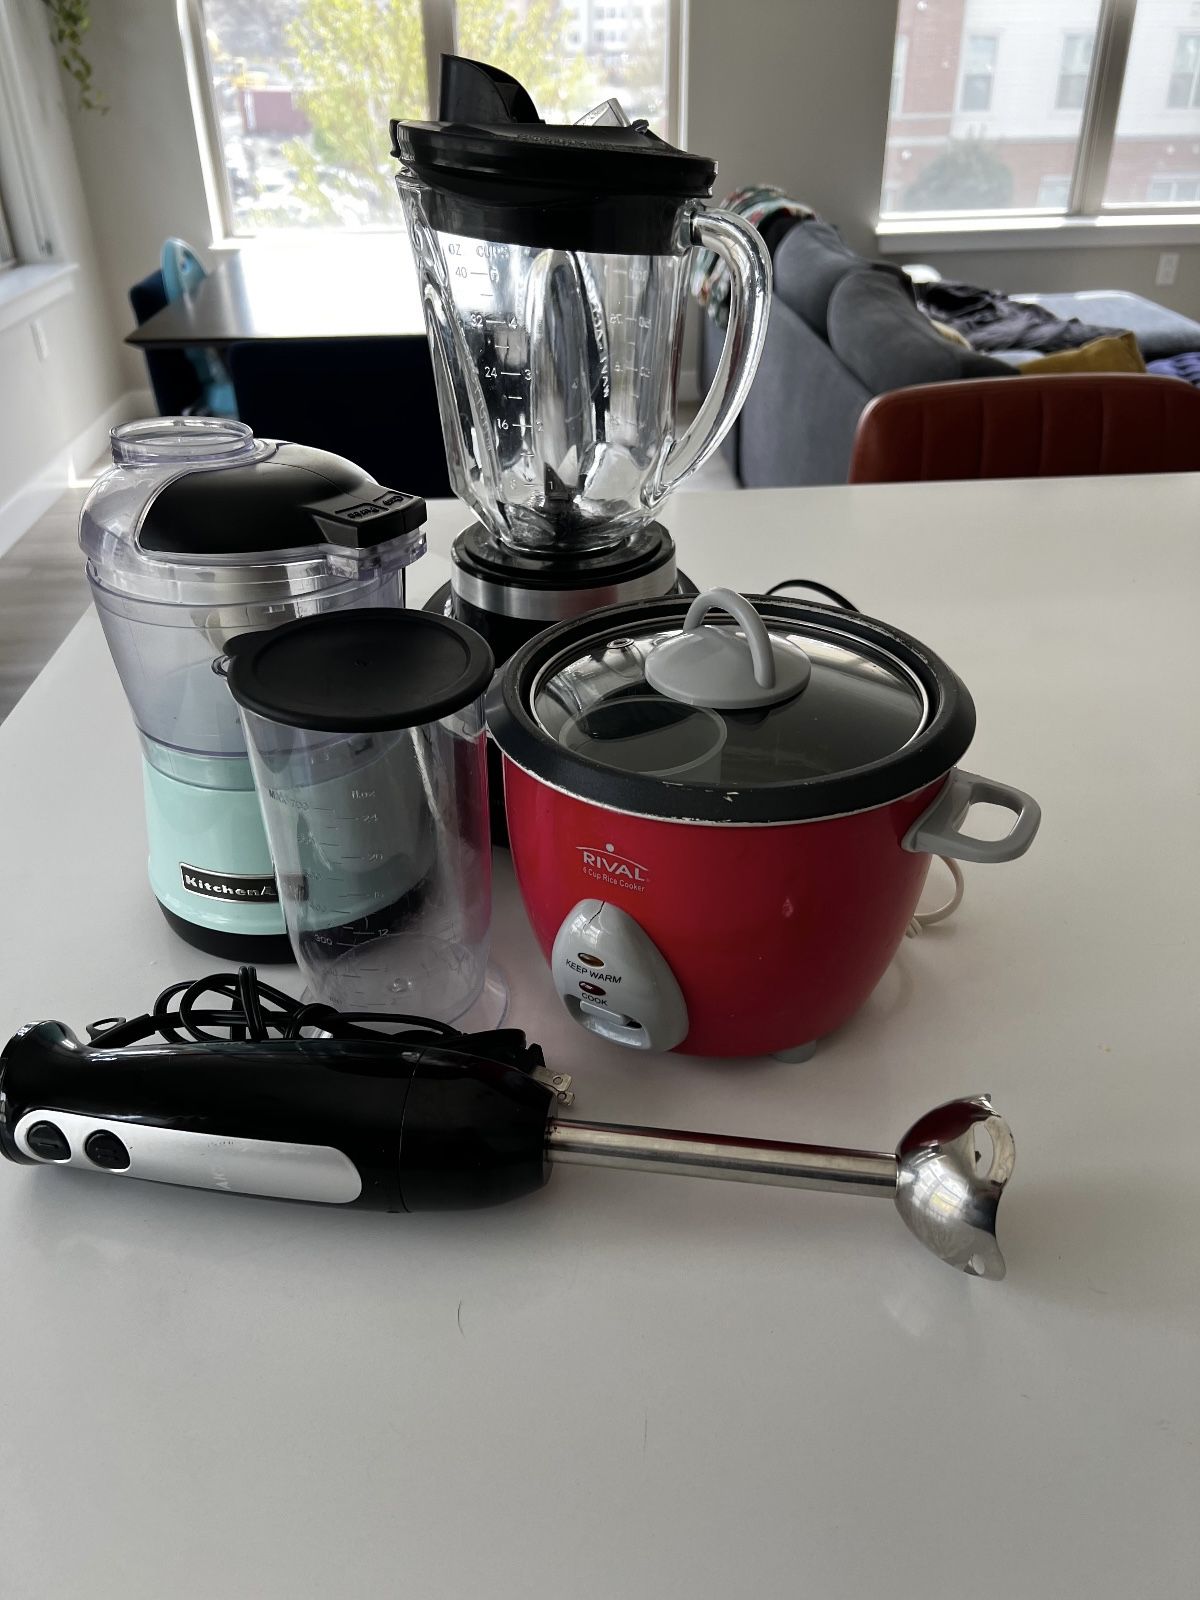 Daily cooking bundle